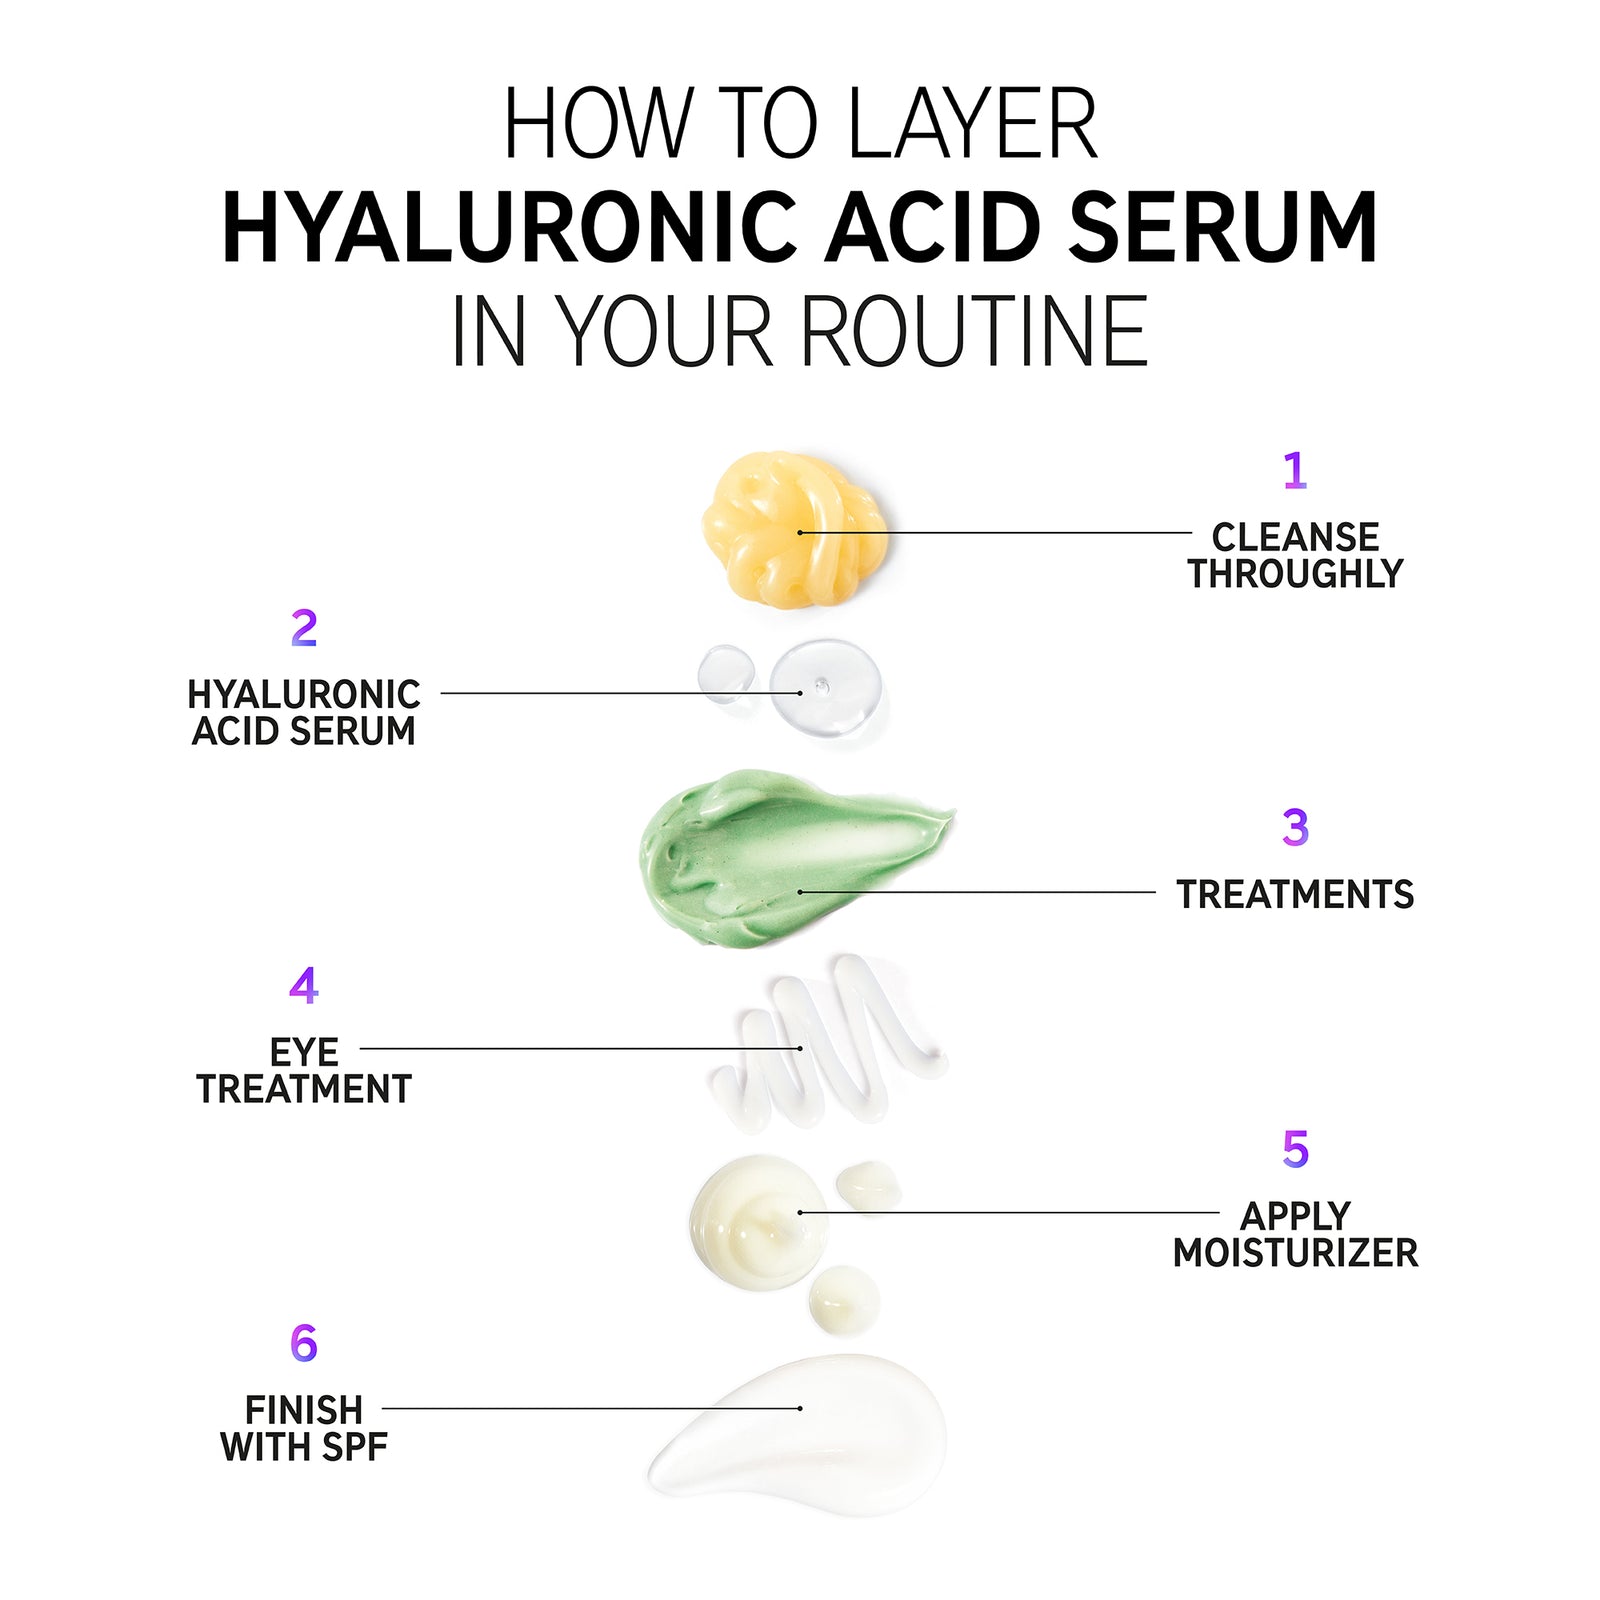 How to layer Hyaluronic Acid Serum 1. Cleanse 2. Hyaluronic acid serum 3. Treatments 4. Eye treatment 5. Moisturizer 6. SPF